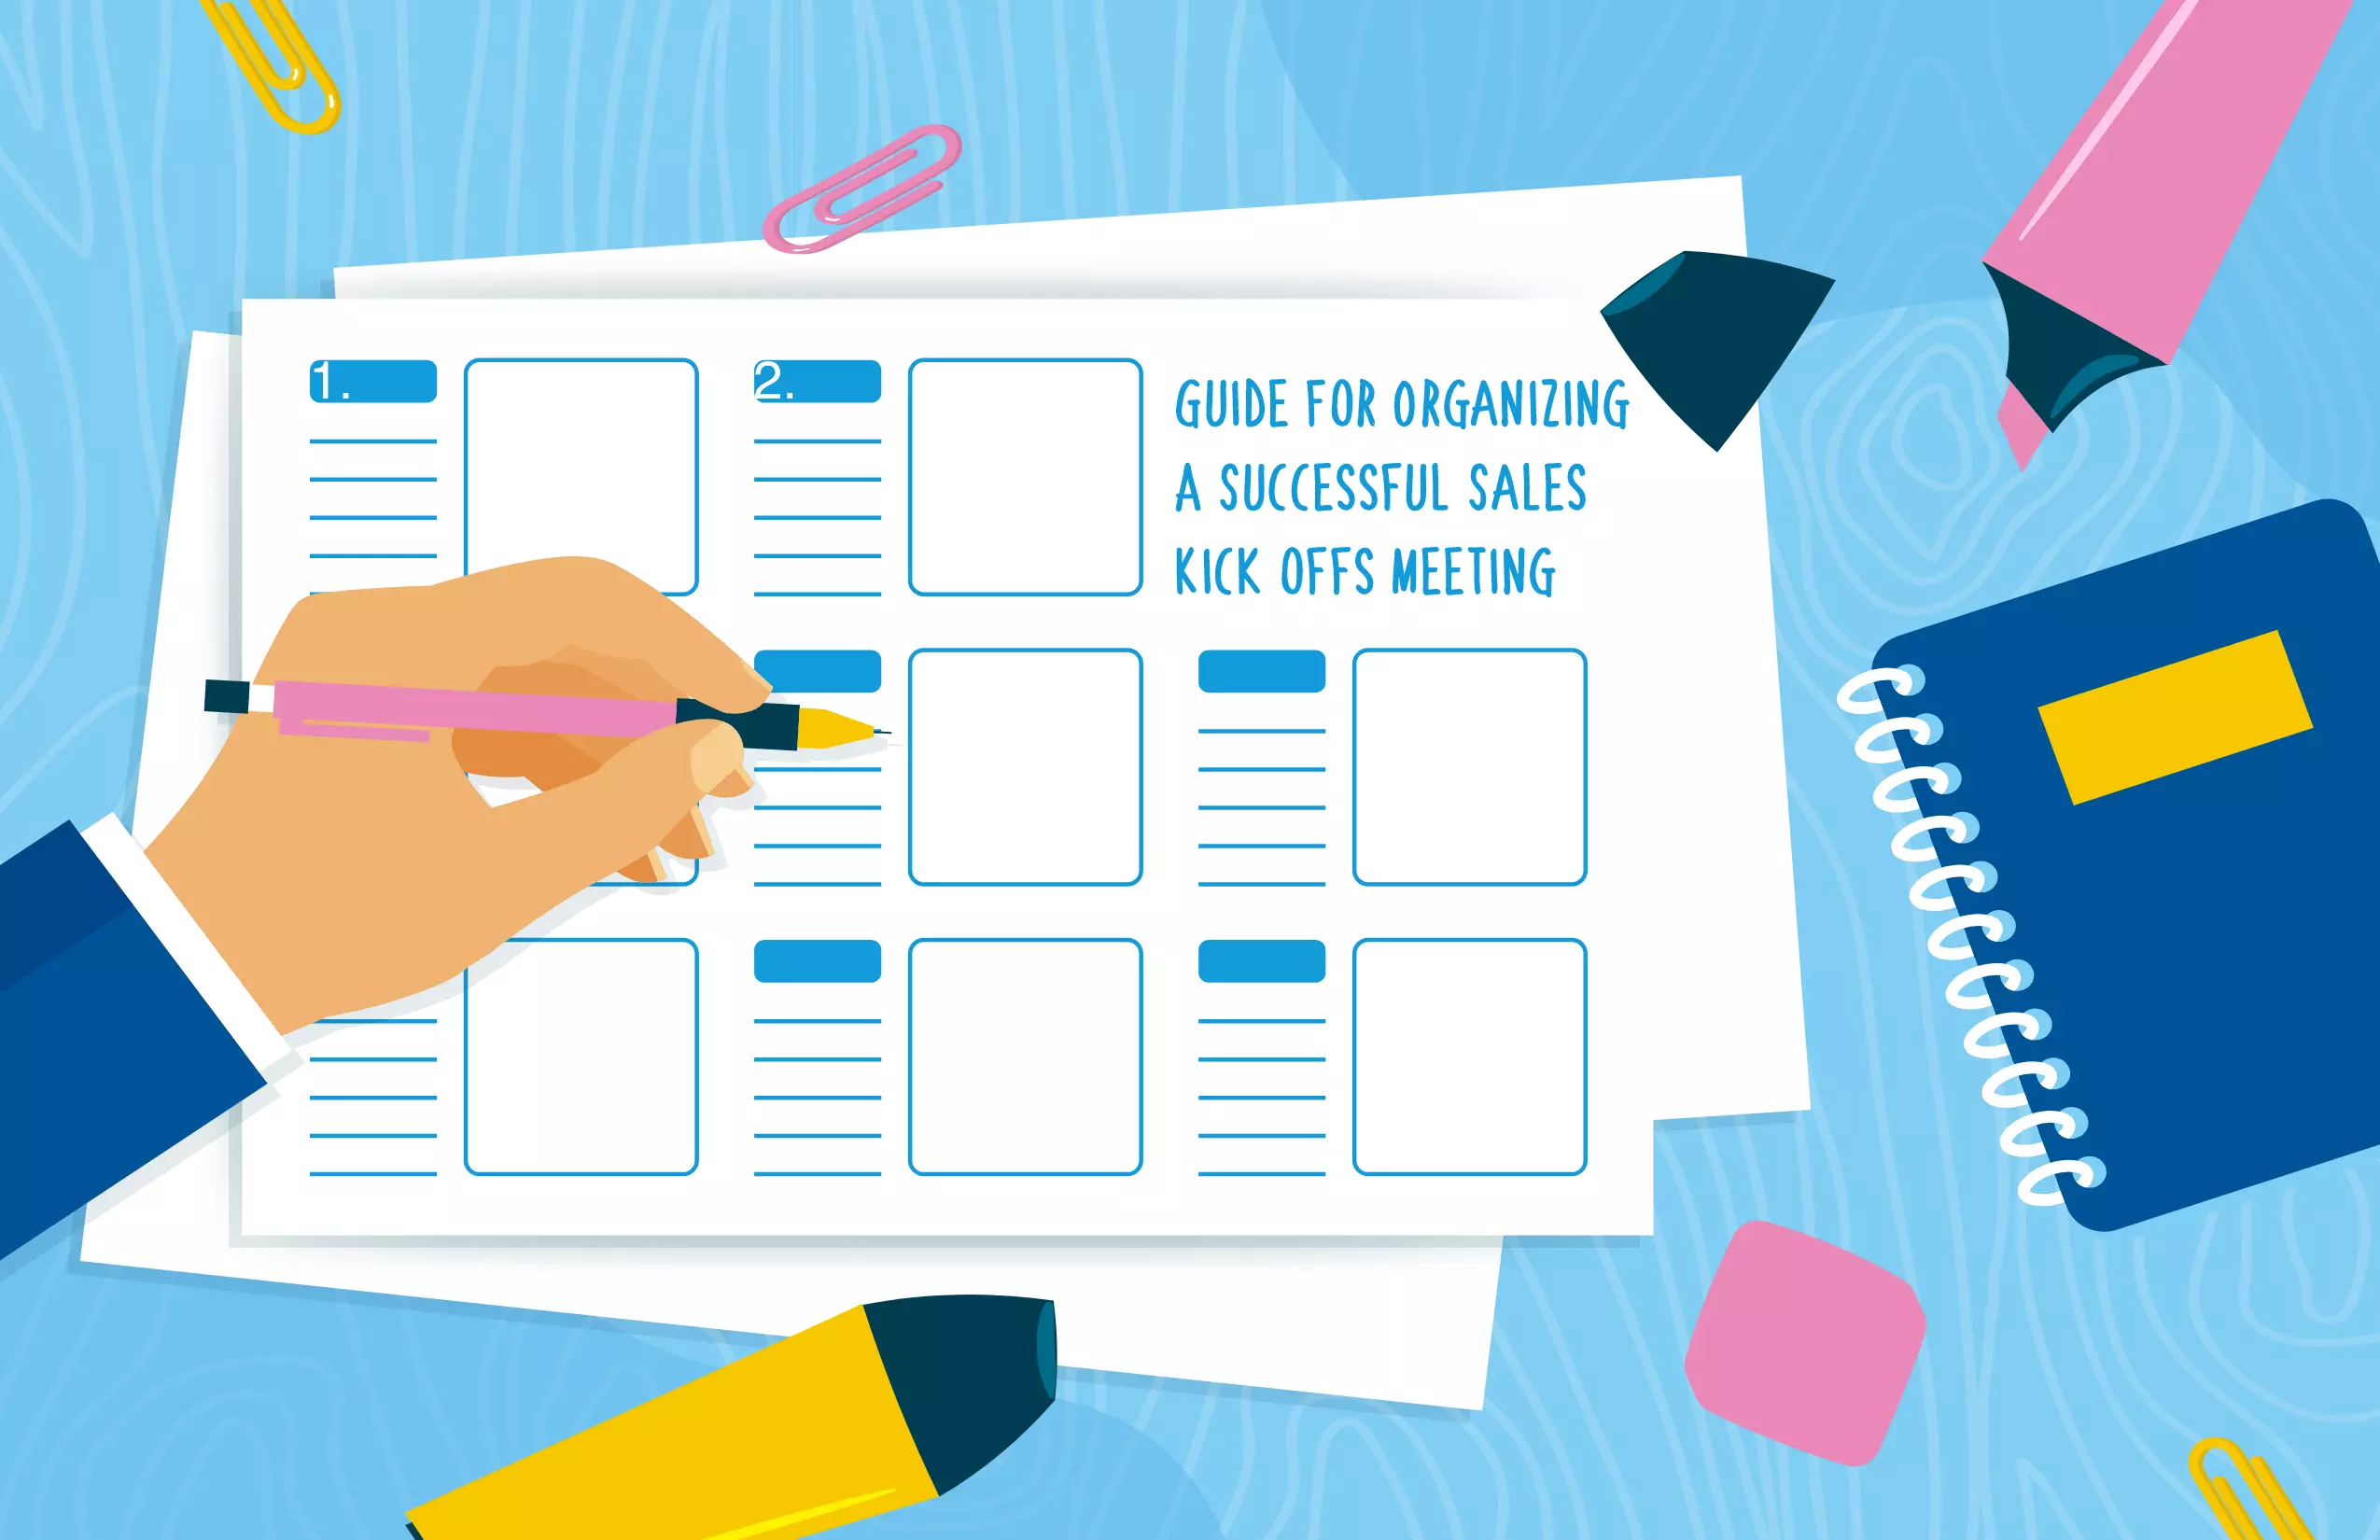 A Complete Guide For Organizing A Successful Sales Kick-offs Meeting